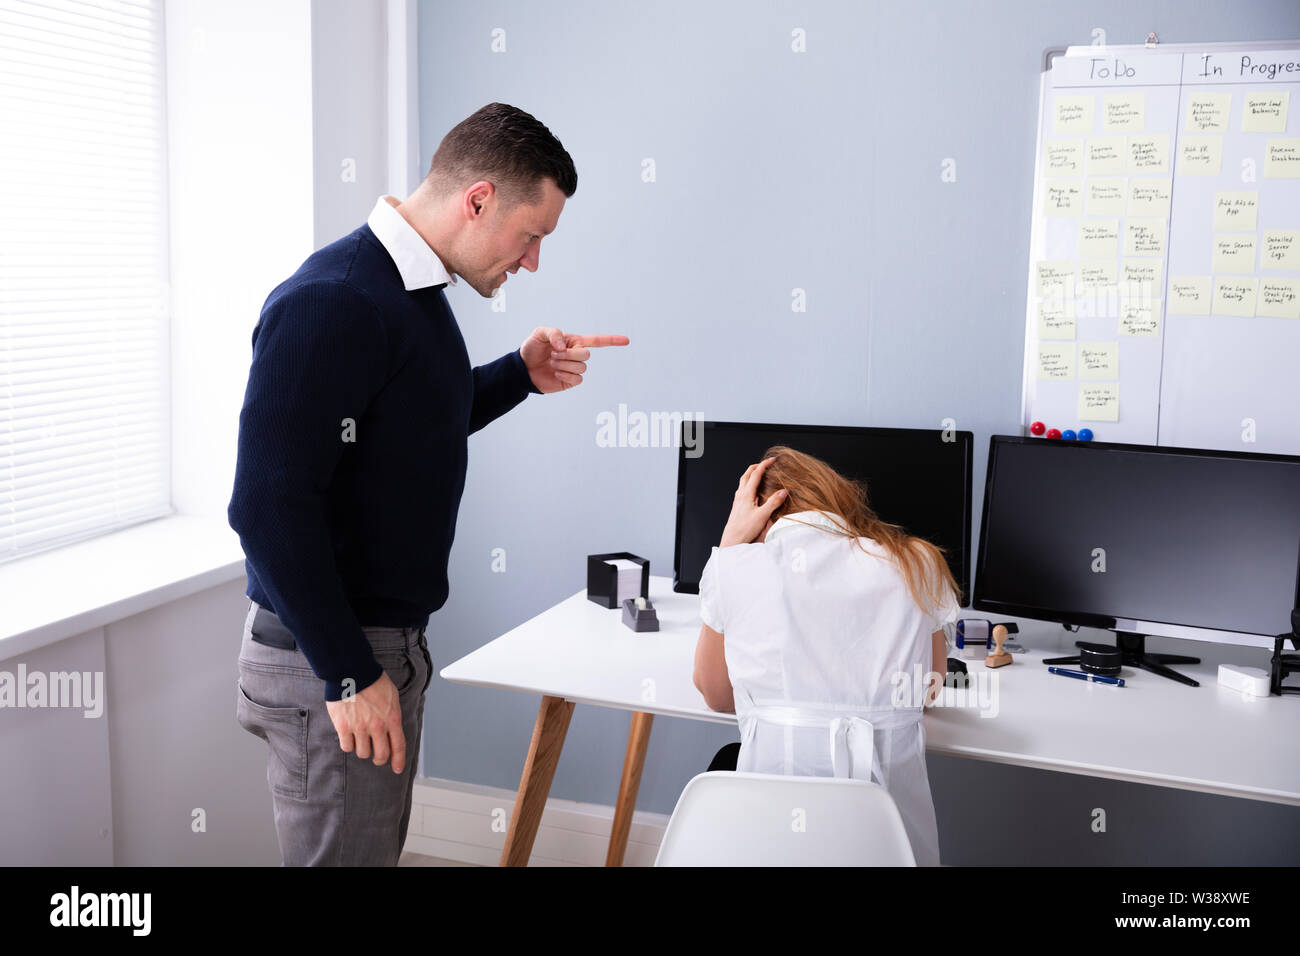 Angry Businessman Shouting At Female Executive In Office Stock Photo